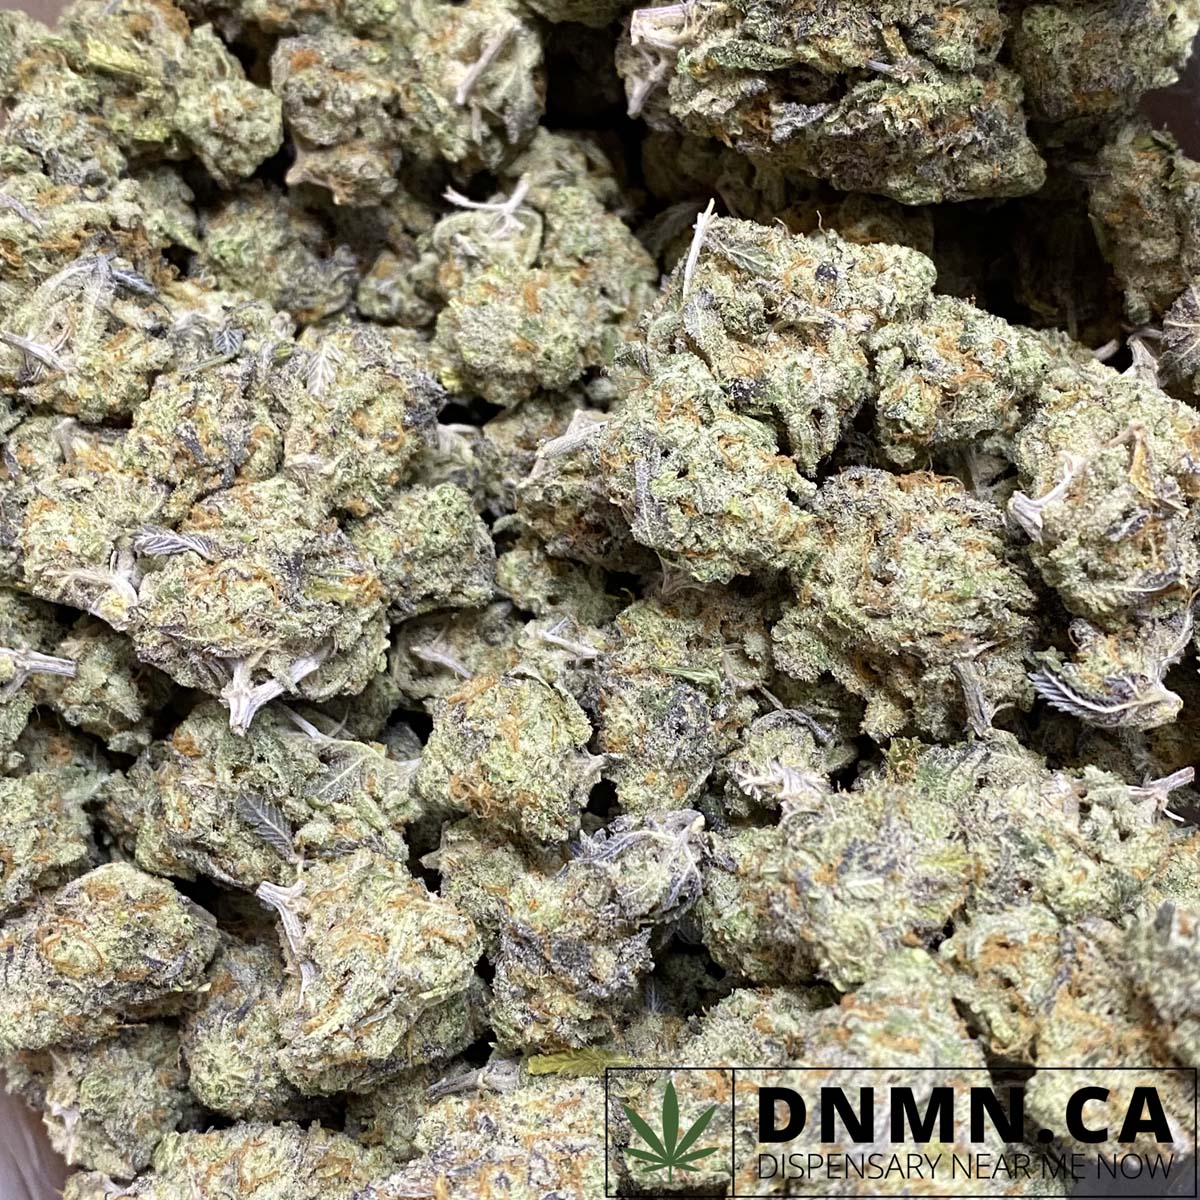 White Berry Strain - Buy Weed Online - Dispensary Near Me